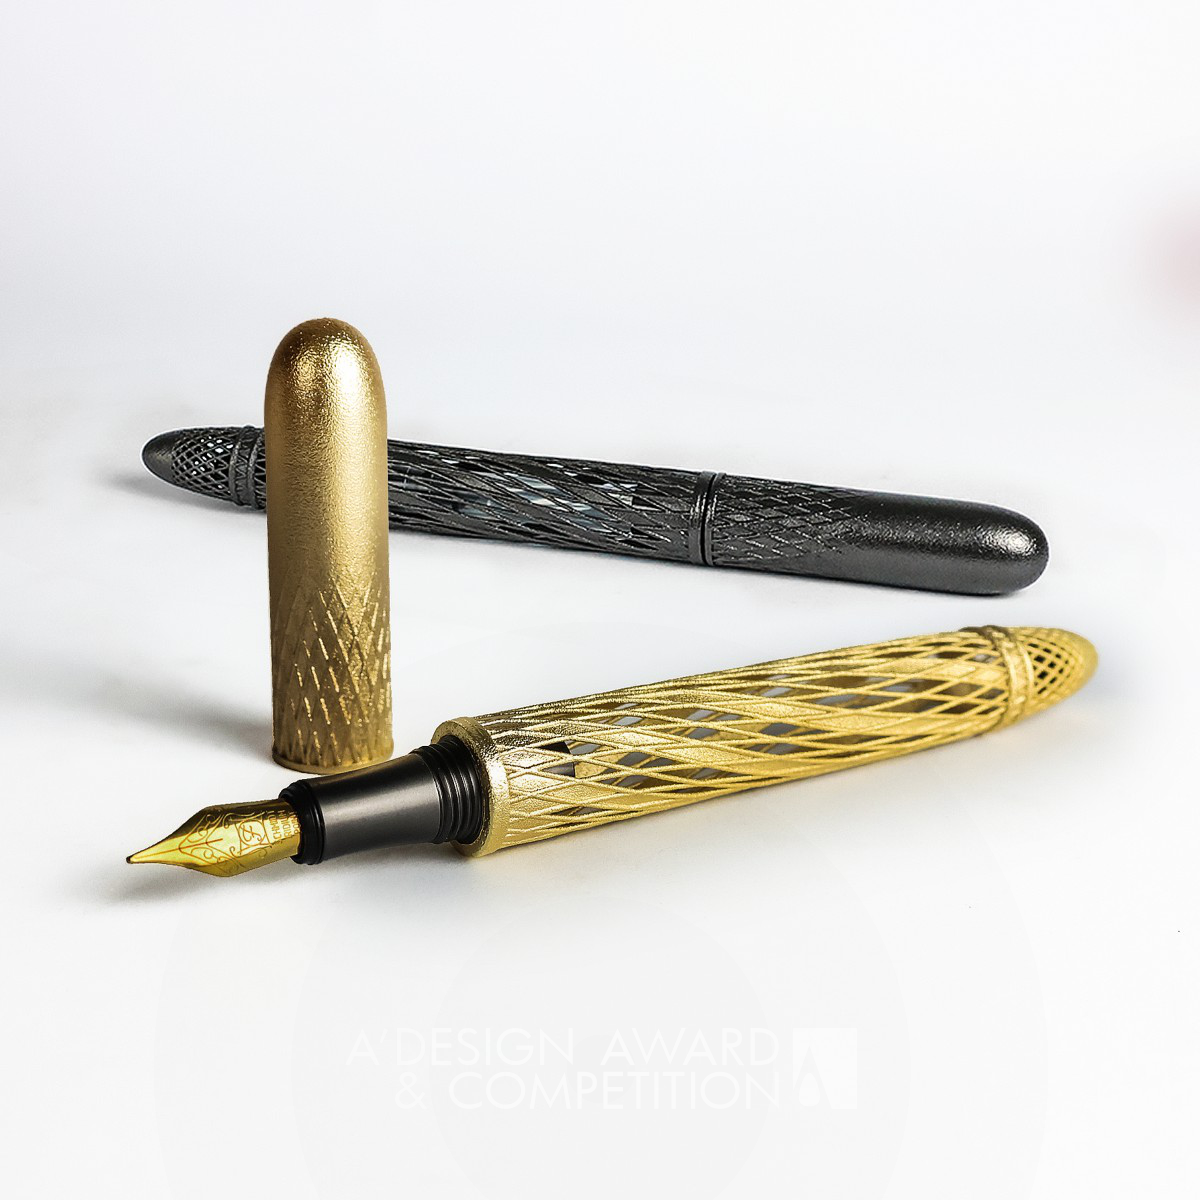 3D Buildmesh Fountain Pen by Chungsheng Chen and Enyang Chen Iron Art and Stationery Supplies Design Award Winner 2023 